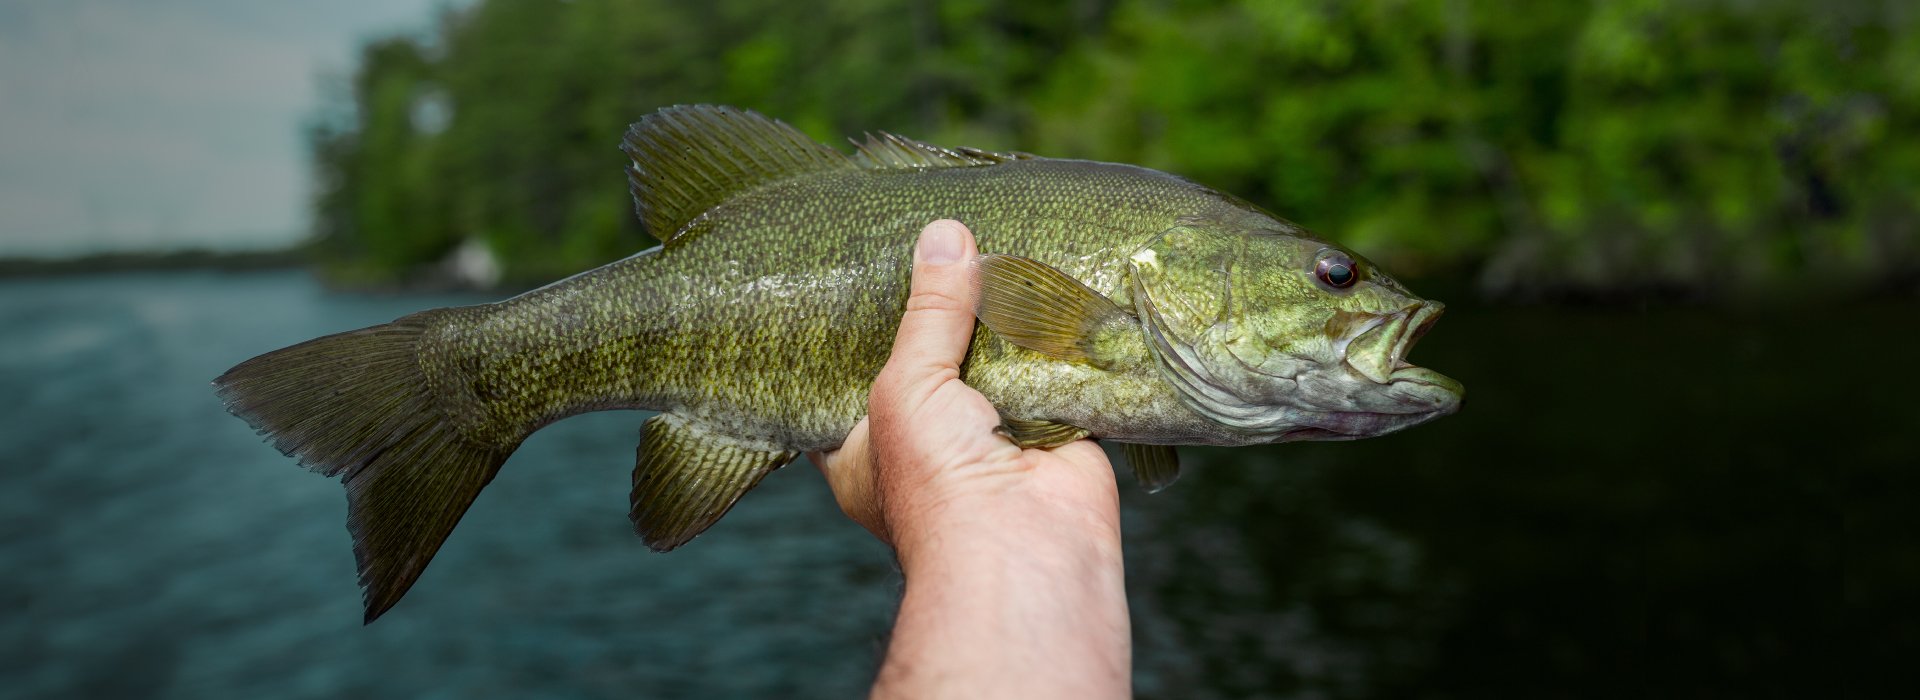 Find them, feed them, reel them in!
Here's how to catch more bass!